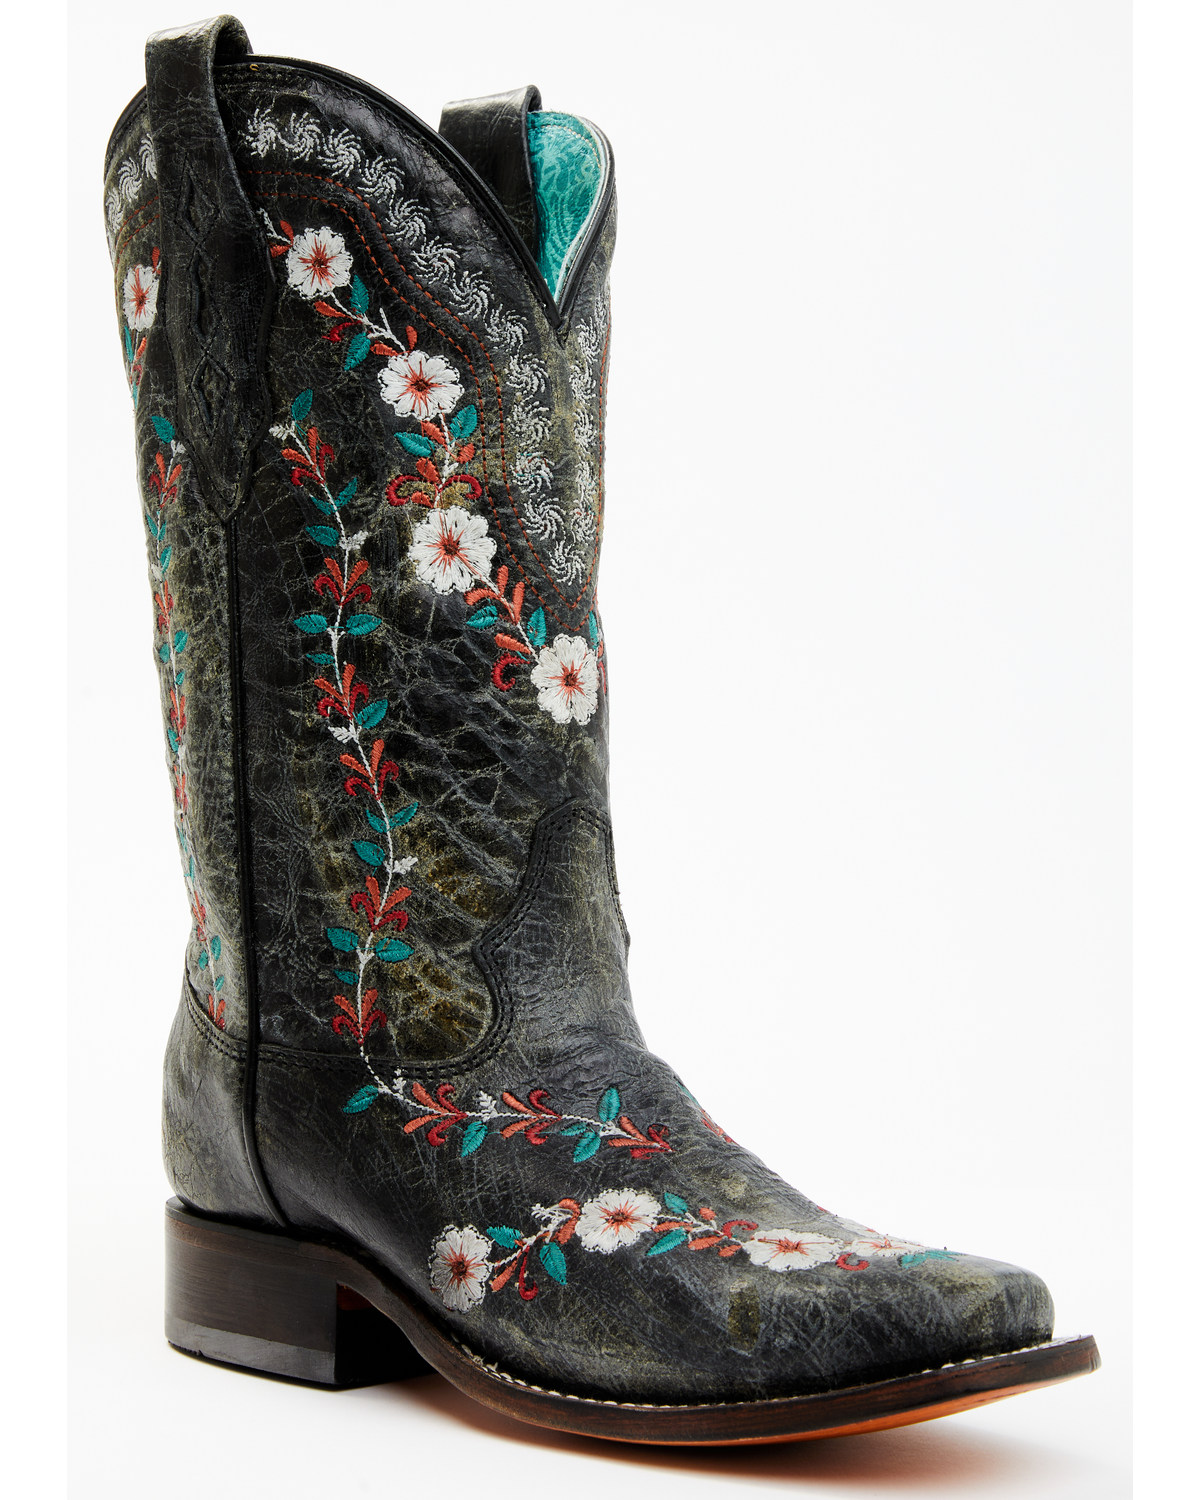 Corral Women's Floral Blacklight Western Boots - Square Toe